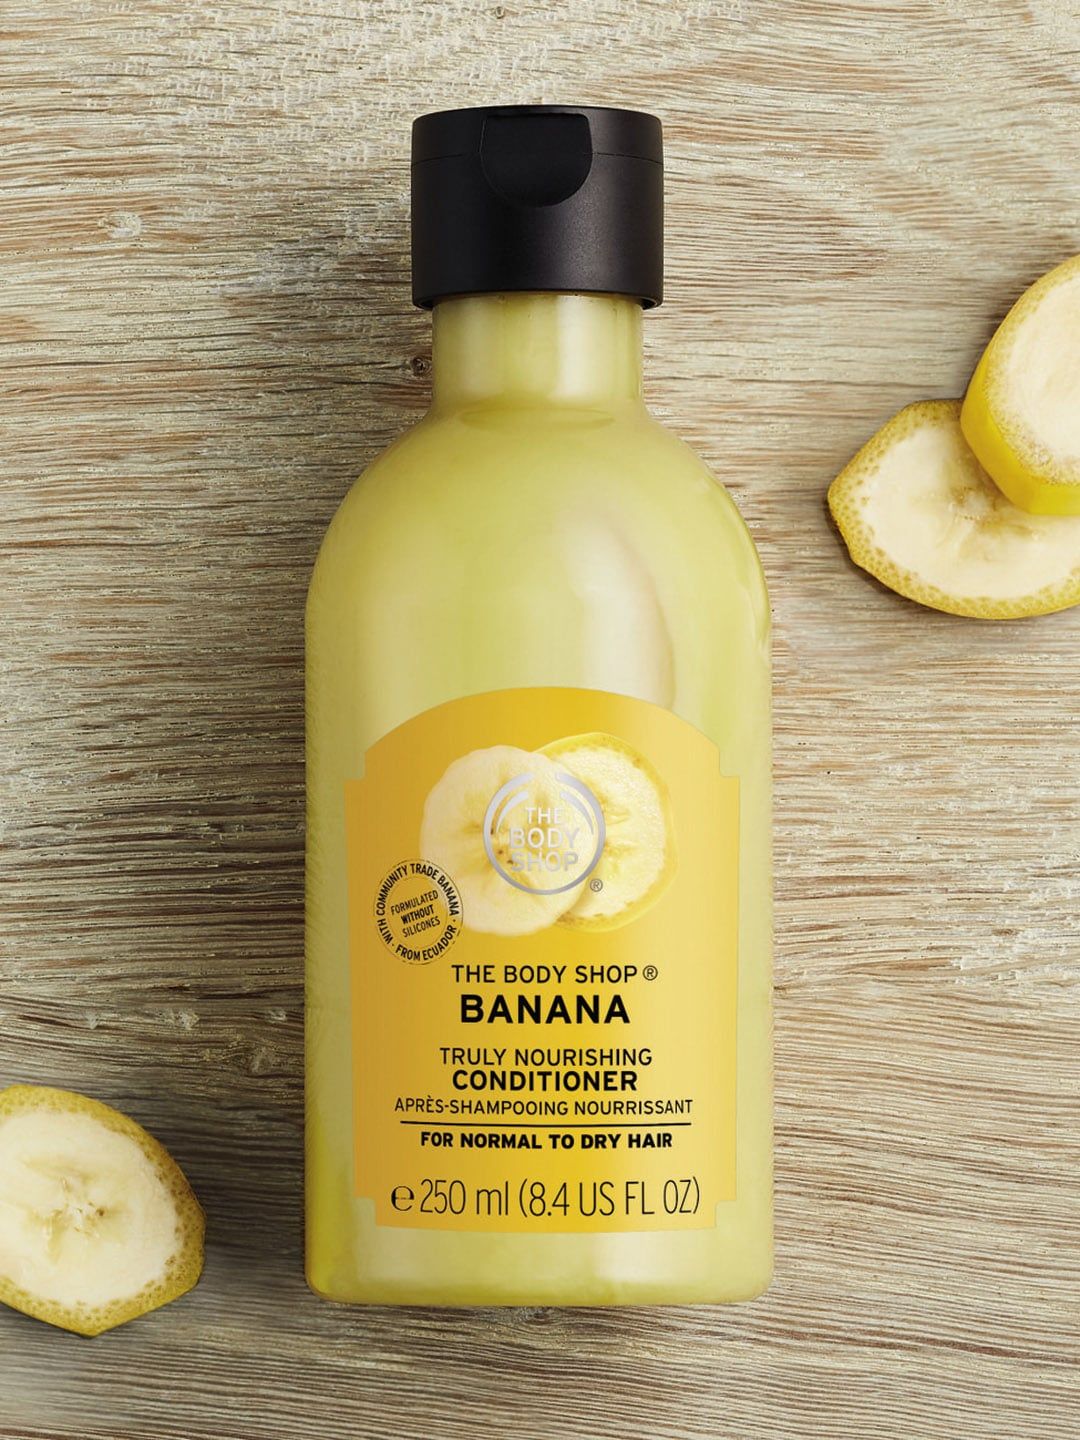 THE BODY SHOP Unisex Banana Truly Nourishing Conditioner 250 ml Price in India